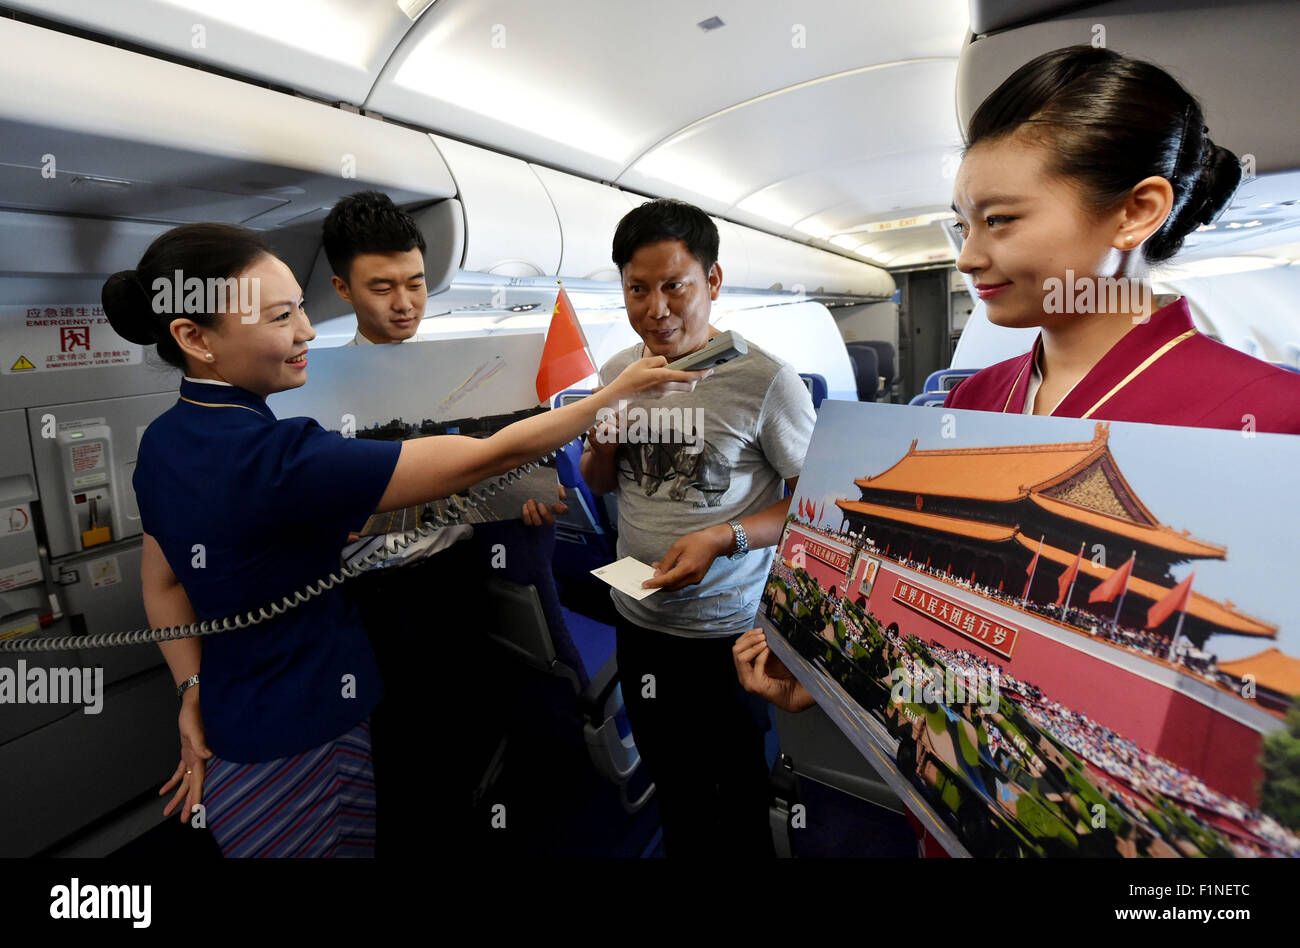 (150905) -- BEIJING, Sept. 5, 2015 (Xinhua) -- A flight attendant (R) shows photos of Beijing V-day parade on flight CZ6366 from Beijing, capital of China, to Haikou, capital of south China's Hainan Province, Sept. 5, 2015. China Southern Airlines started an event called 'In Commemoration of Beijing V-day parade' on a Beijing-Haikou flight Saturday, showing the parade photos for passengers. China on Thursday held commemoration activities, including a grand military parade, to mark the 70th anniversary of the victory of the Chinese People's War of Resistance against Japanese Aggression and the Stock Photo